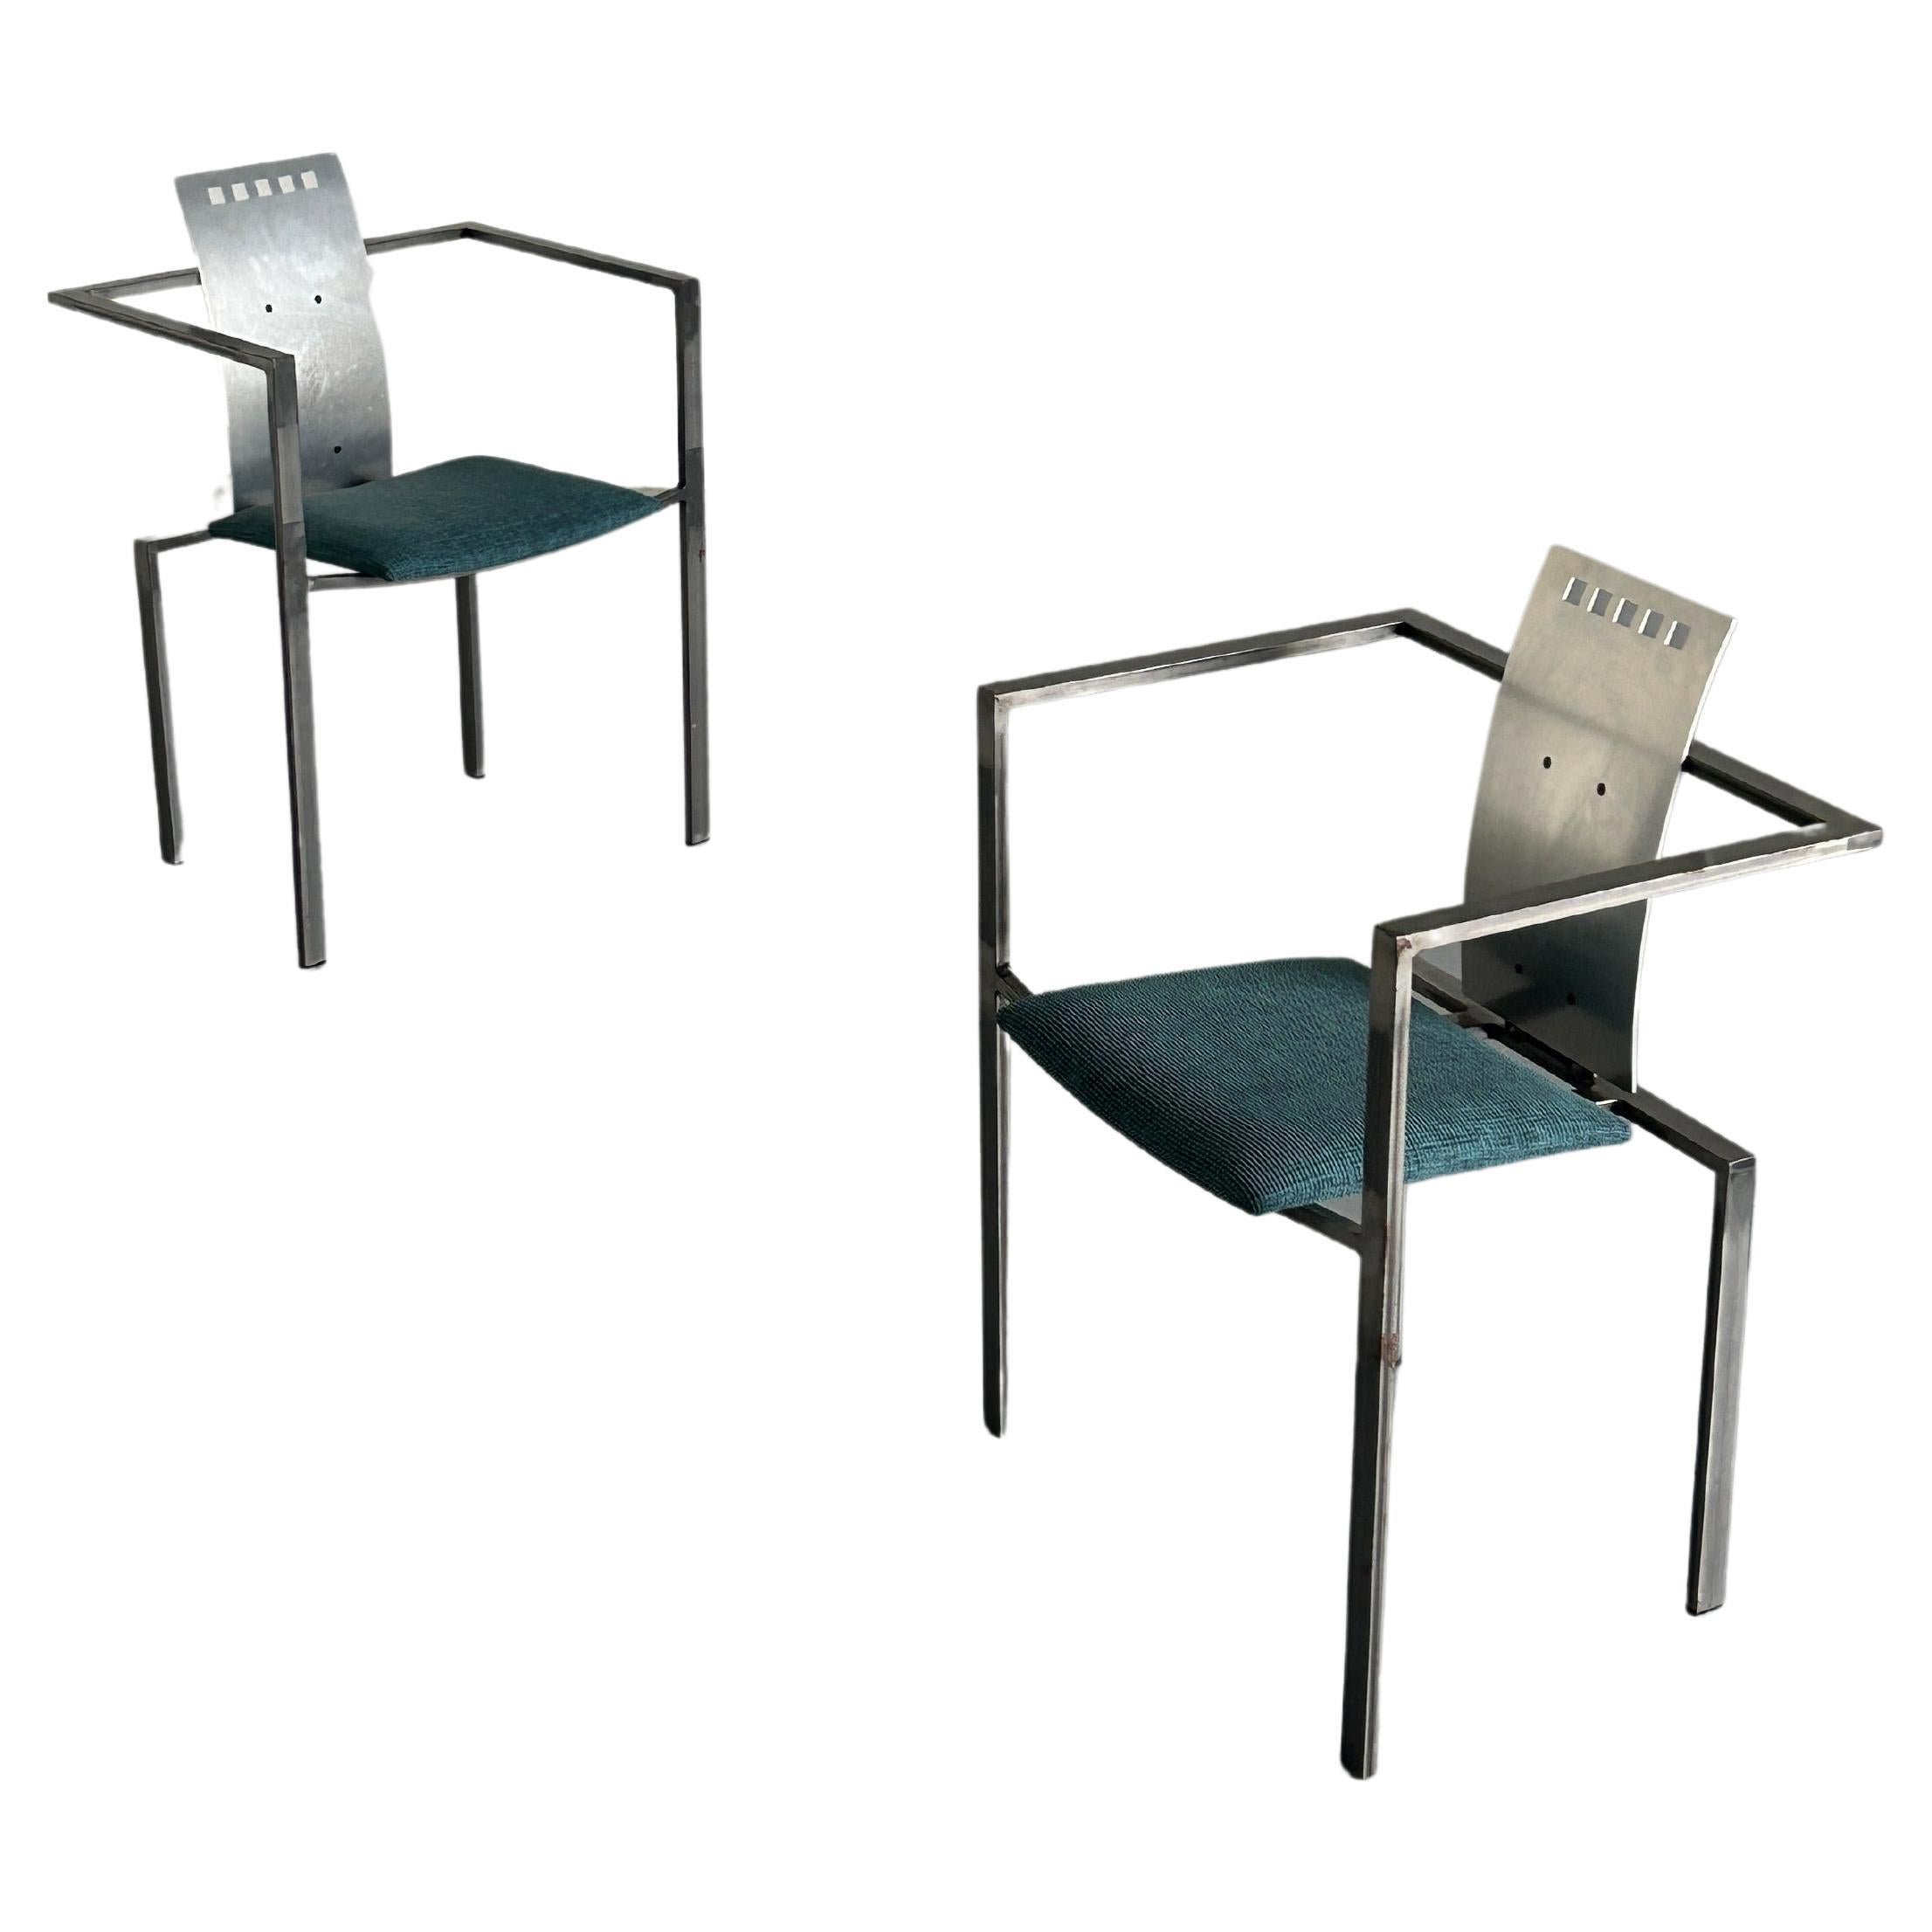 1 of 2 Memphis Design Postmodern Chairs by Karl Friedrich Förster for KFF, 1980s For Sale